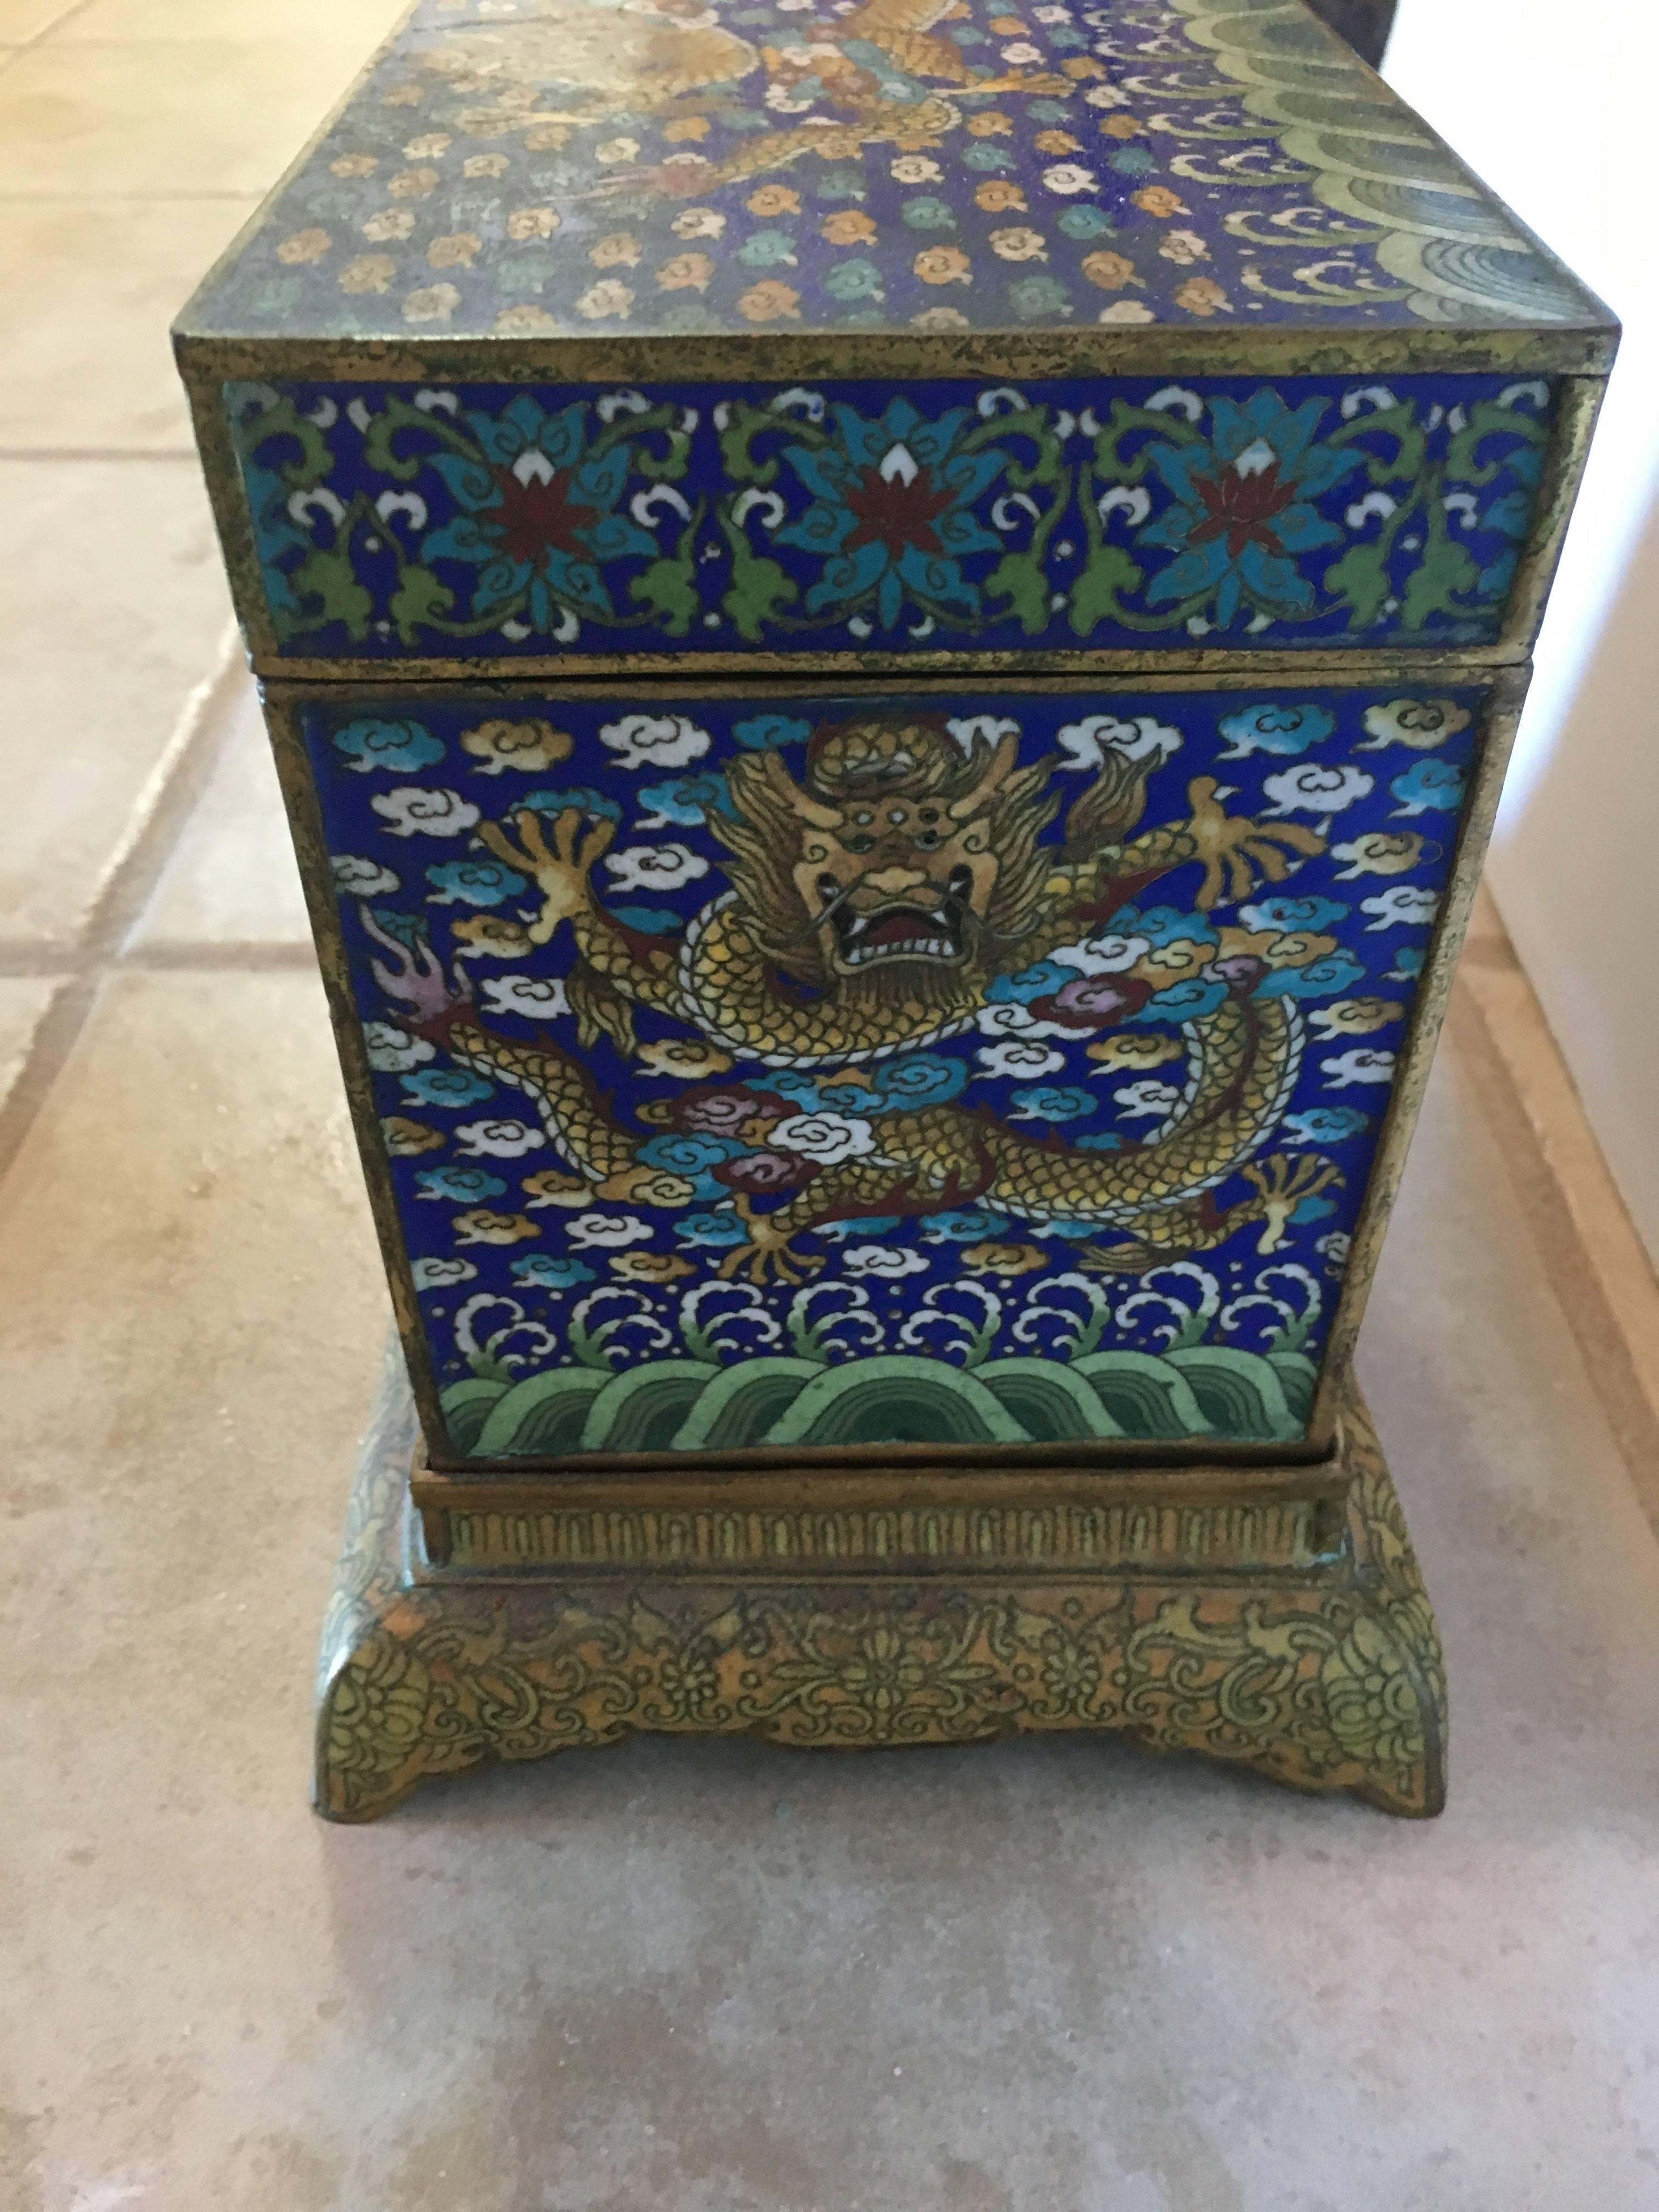 The Cloisonné box is well handmade with stand the lid to match. Dragon Design with 5 claw fingers! Scholar's object.